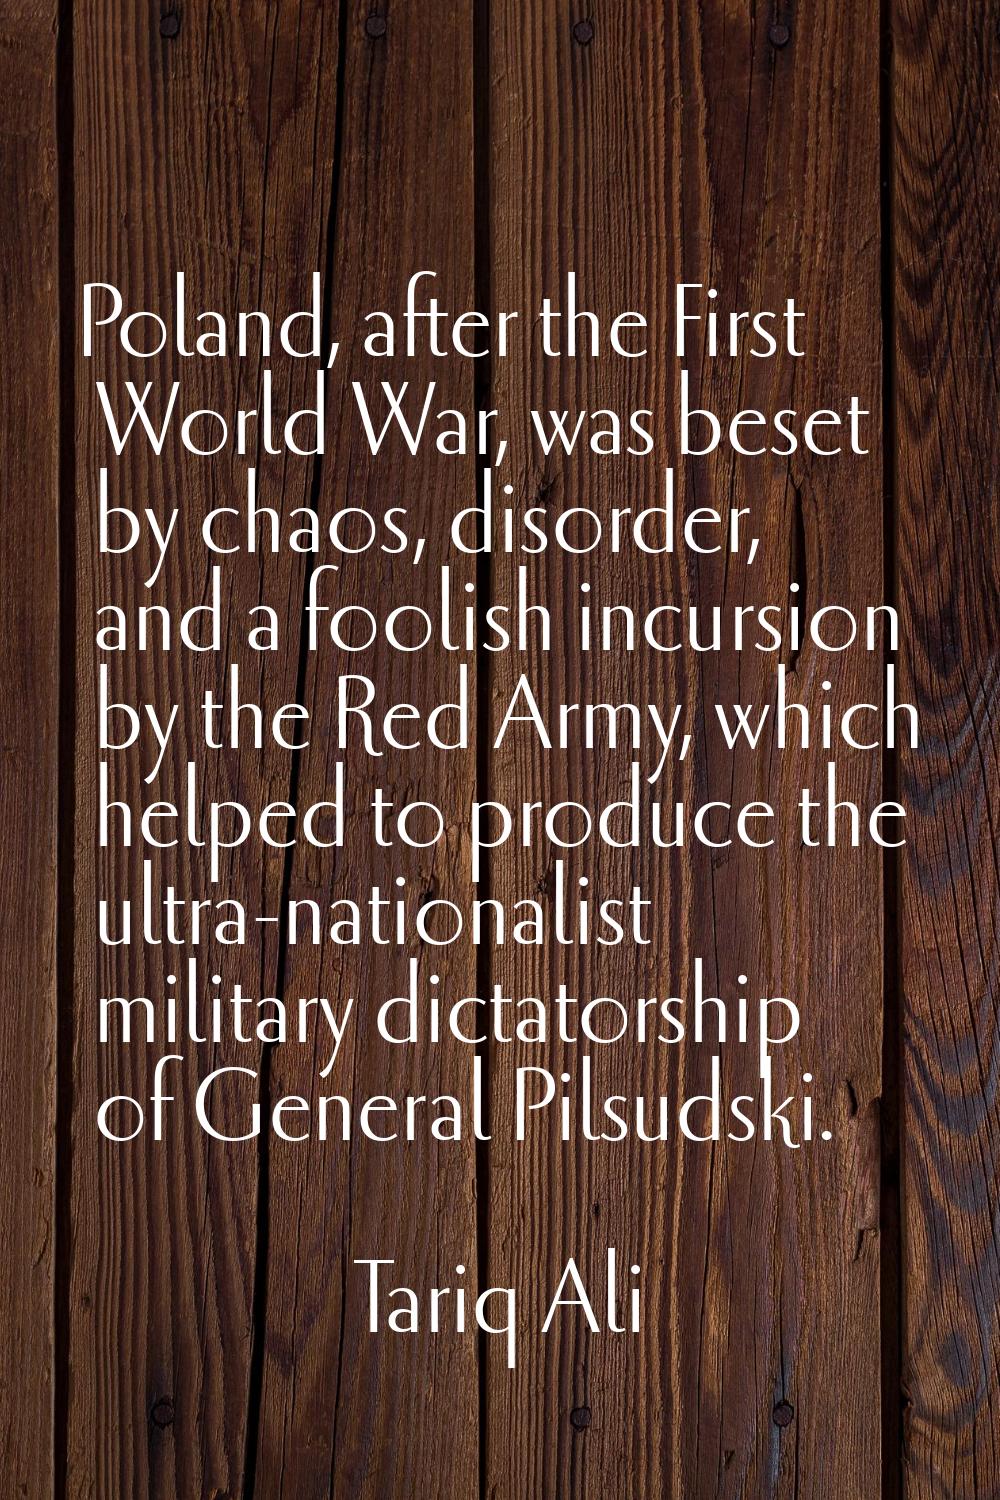 Poland, after the First World War, was beset by chaos, disorder, and a foolish incursion by the Red